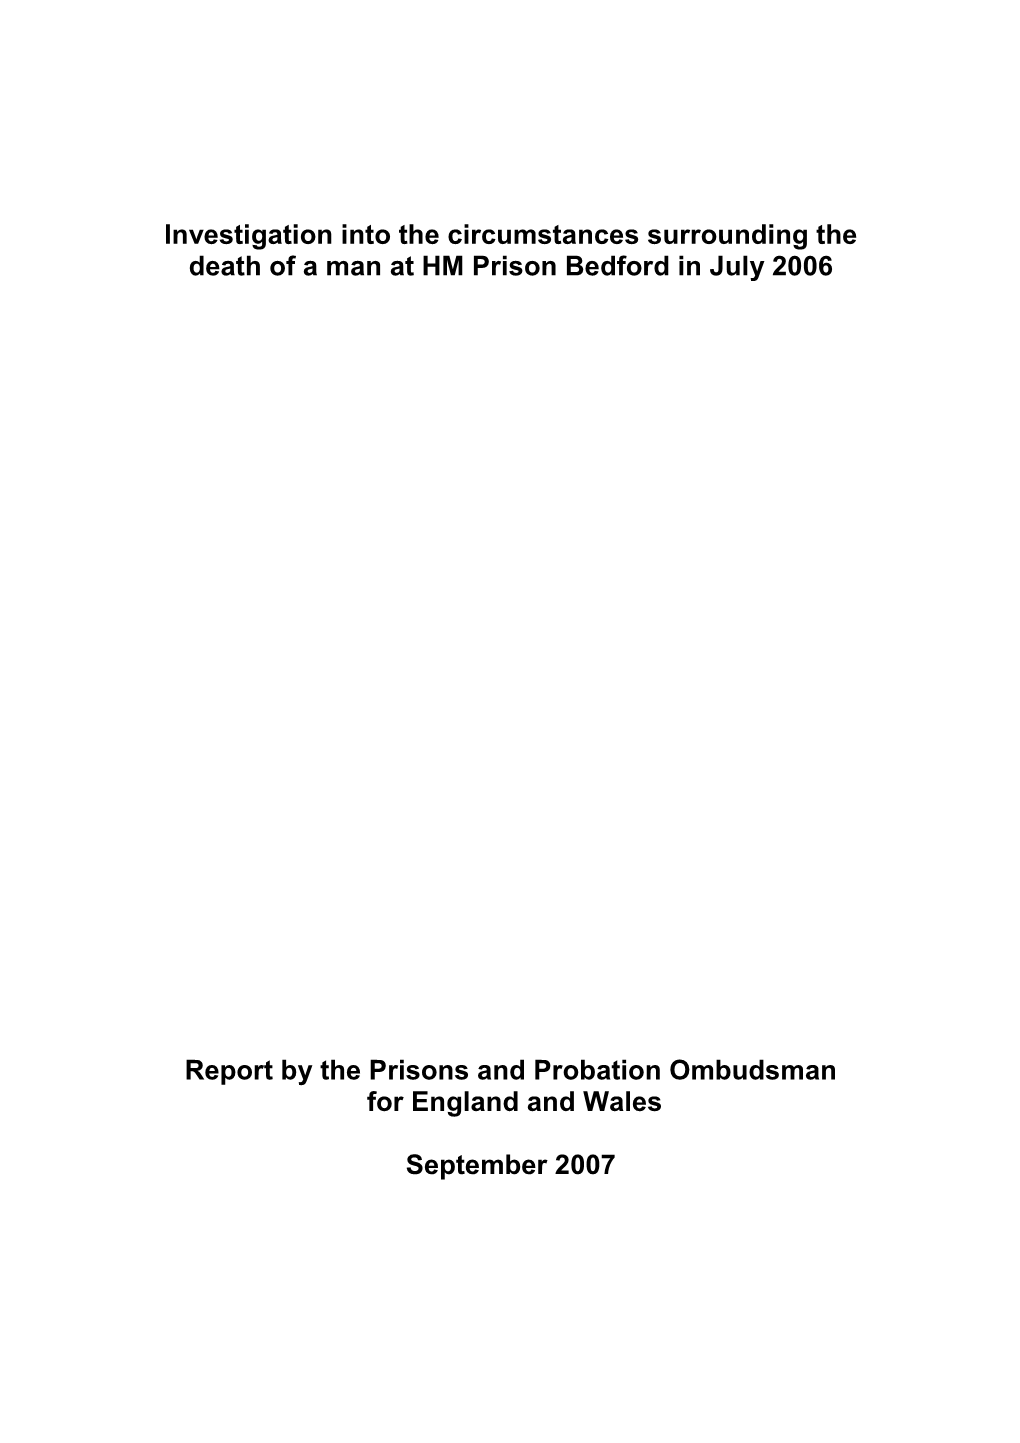 Investigation Into the Circumstances Surrounding the Death of a Man at HM Prison Bedford in July 2006